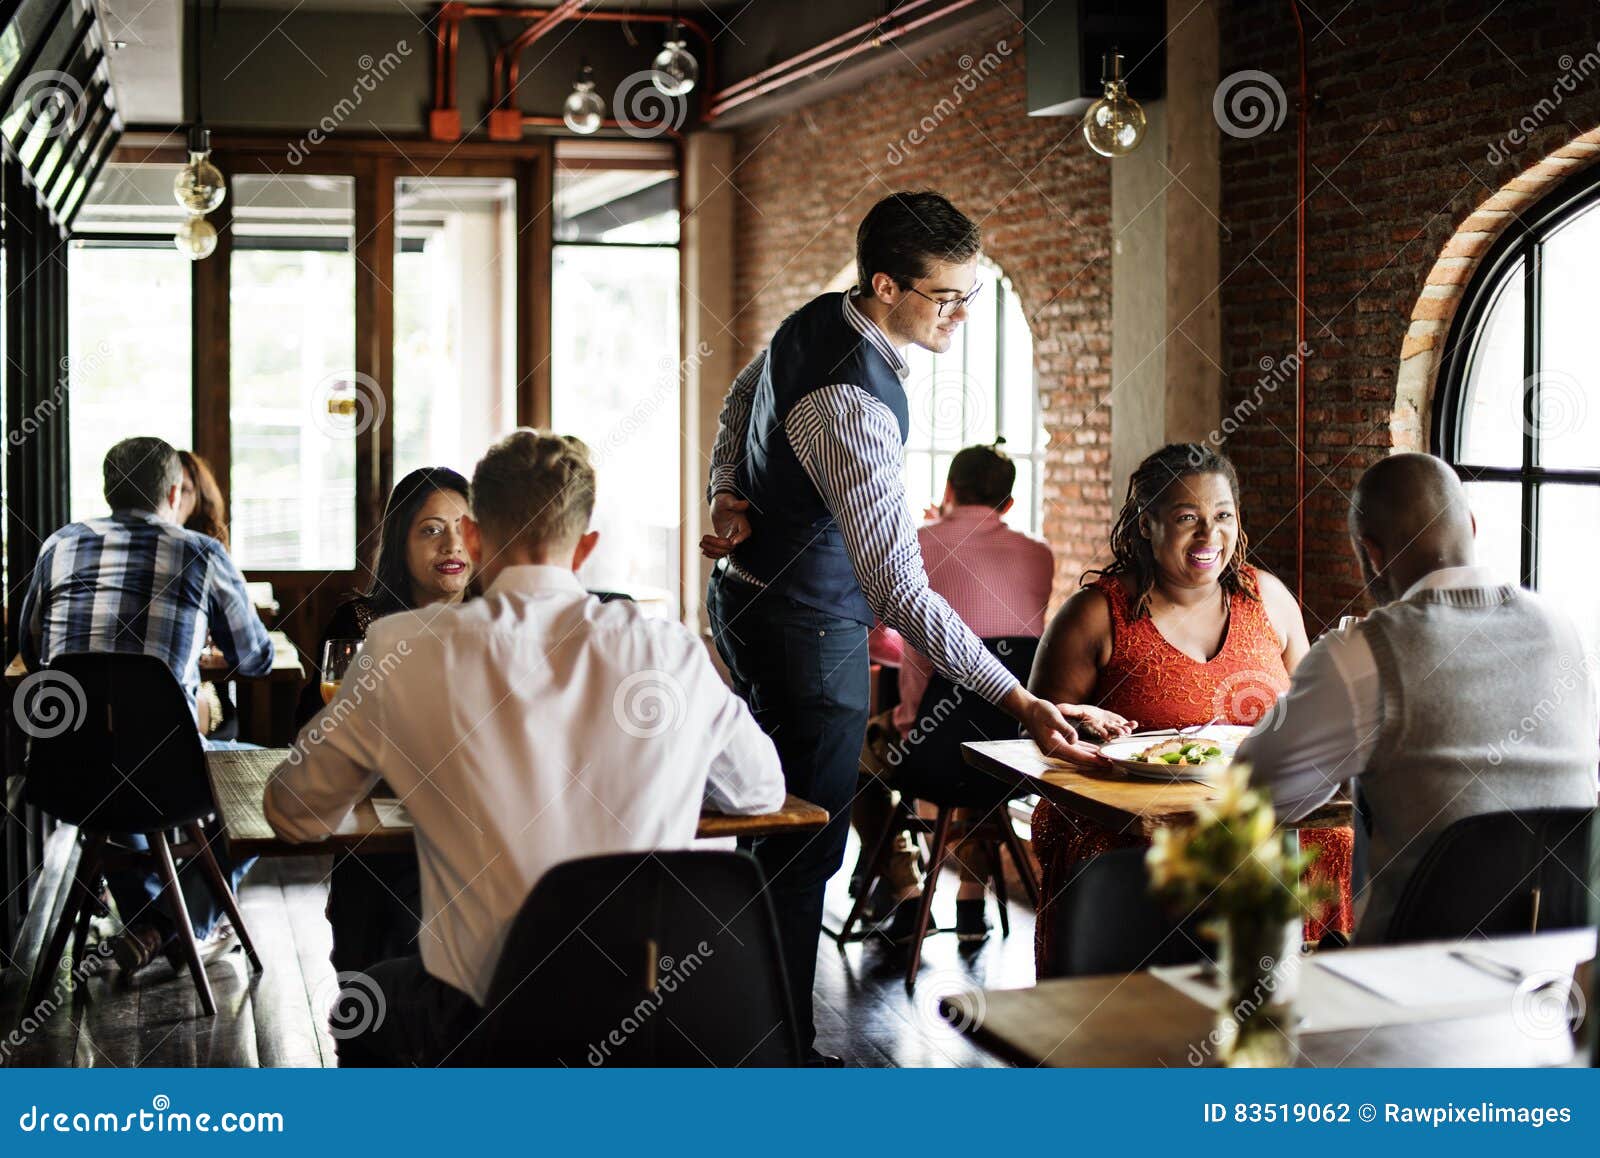 restaurant chilling out classy lifestyle reserved concept